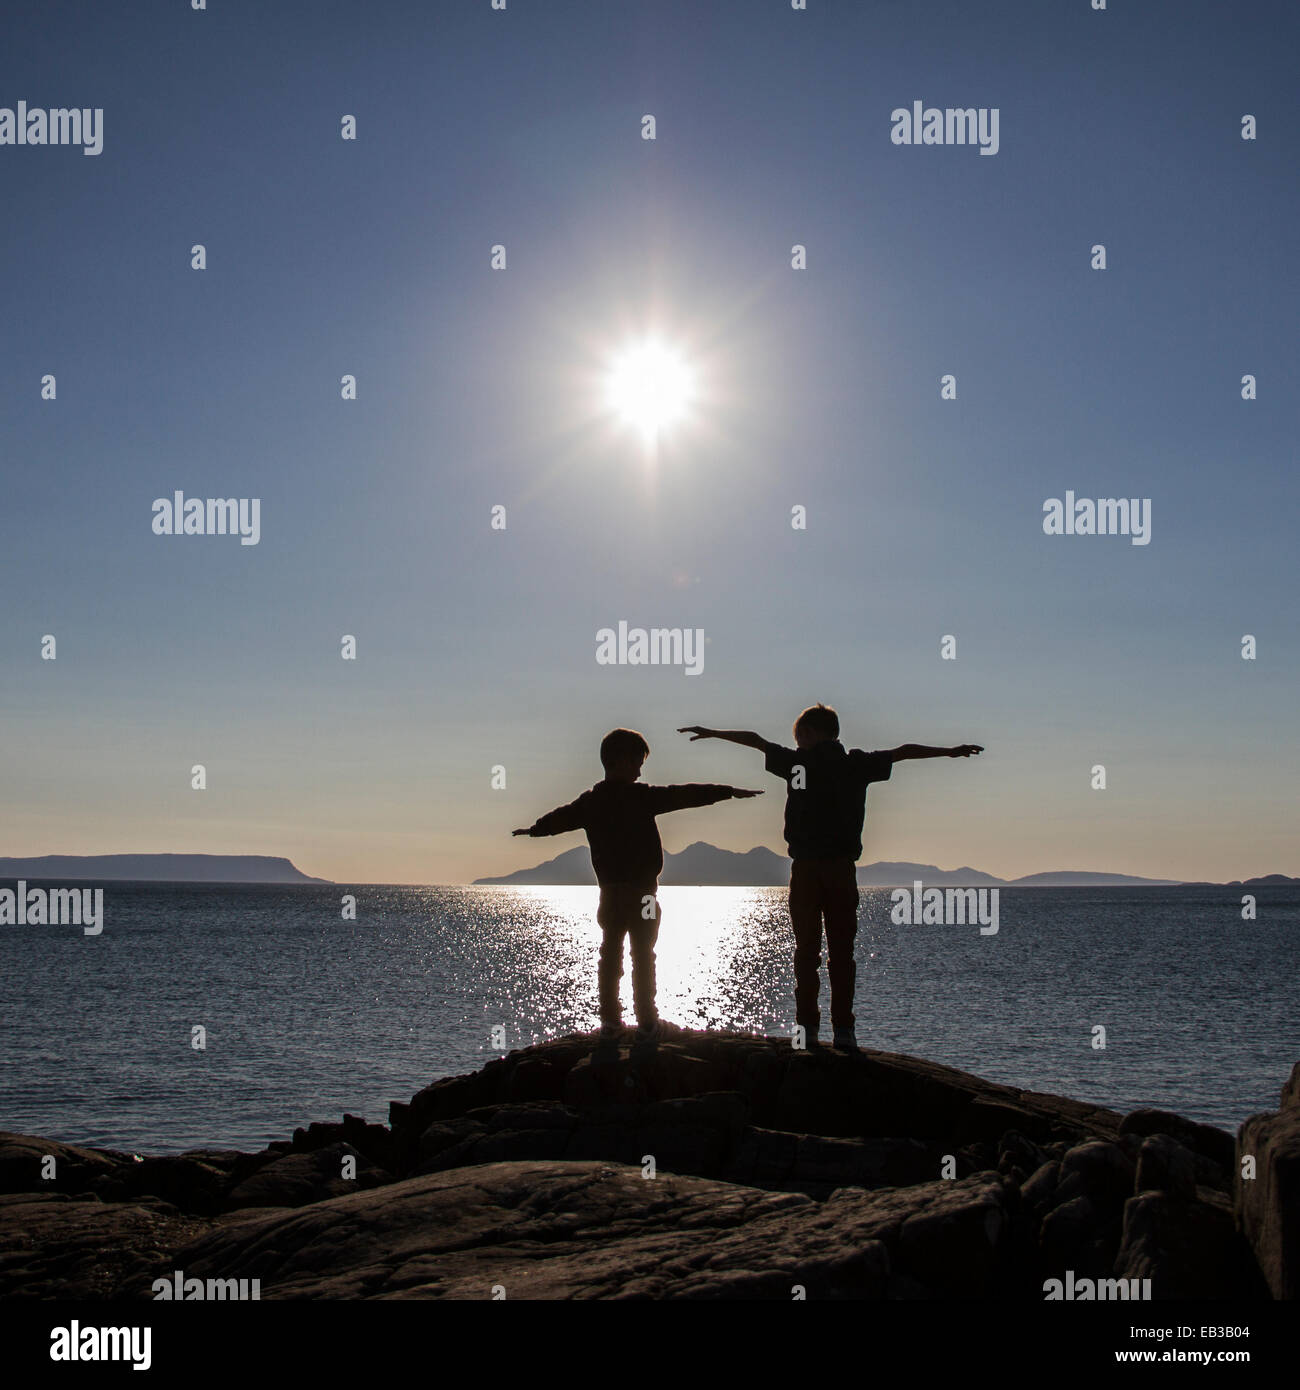 Silhouette of two boys standing on rocks with their arms outstretched, England, UK Stock Photo